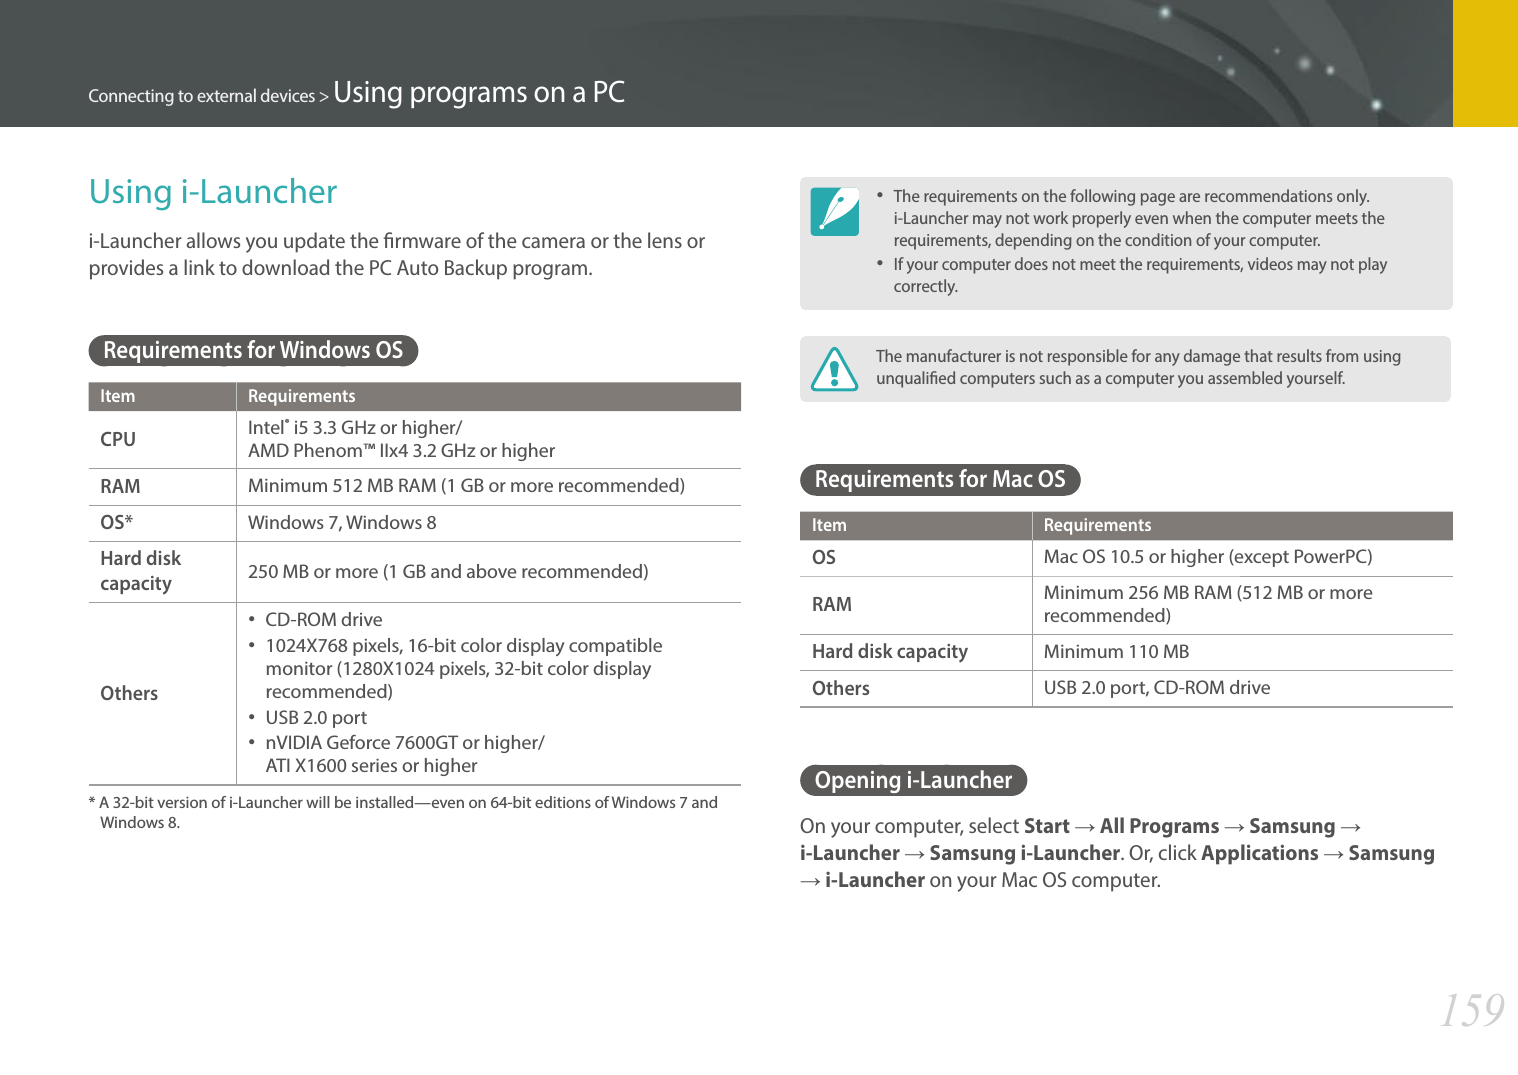 159Connecting to external devices &gt; Using programs on a PCUsing i-Launcheri-Launcher allows you update the rmware of the camera or the lens or provides a link to download the PC Auto Backup program. Requirements for Windows OSItem RequirementsCPUIntel® i5 3.3 GHz or higher/ AMD Phenom™ IIx4 3.2 GHz or higherRAMMinimum 512 MB RAM (1 GB or more recommended)OS*Windows 7, Windows 8Hard disk capacity250 MB or more (1 GB and above recommended)Others•  CD-ROM drive•  1024X768 pixels, 16-bit color display compatible monitor (1280X1024 pixels, 32-bit color display recommended)•  USB 2.0 port•  nVIDIA Geforce 7600GT or higher/  ATI X1600 series or higher*  A 32-bit version of i-Launcher will be installed—even on 64-bit editions of Windows 7 and Windows 8. • The requirements on the following page are recommendations only. i-Launcher may not work properly even when the computer meets the requirements, depending on the condition of your computer.• If your computer does not meet the requirements, videos may not play correctly.The manufacturer is not responsible for any damage that results from using unqualied computers such as a computer you assembled yourself.Requirements for Mac OSItem RequirementsOSMac OS 10.5 or higher (except PowerPC)RAMMinimum 256 MB RAM (512 MB or more recommended)Hard disk capacityMinimum 110 MBOthersUSB 2.0 port, CD-ROM driveOpening i-LauncherOn your computer, select Start ĺ All Programs ĺ Samsung ĺ i-Launcher ĺ Samsung i-Launcher. Or, click Applications ĺ Samsung ĺ i-Launcher on your Mac OS computer.